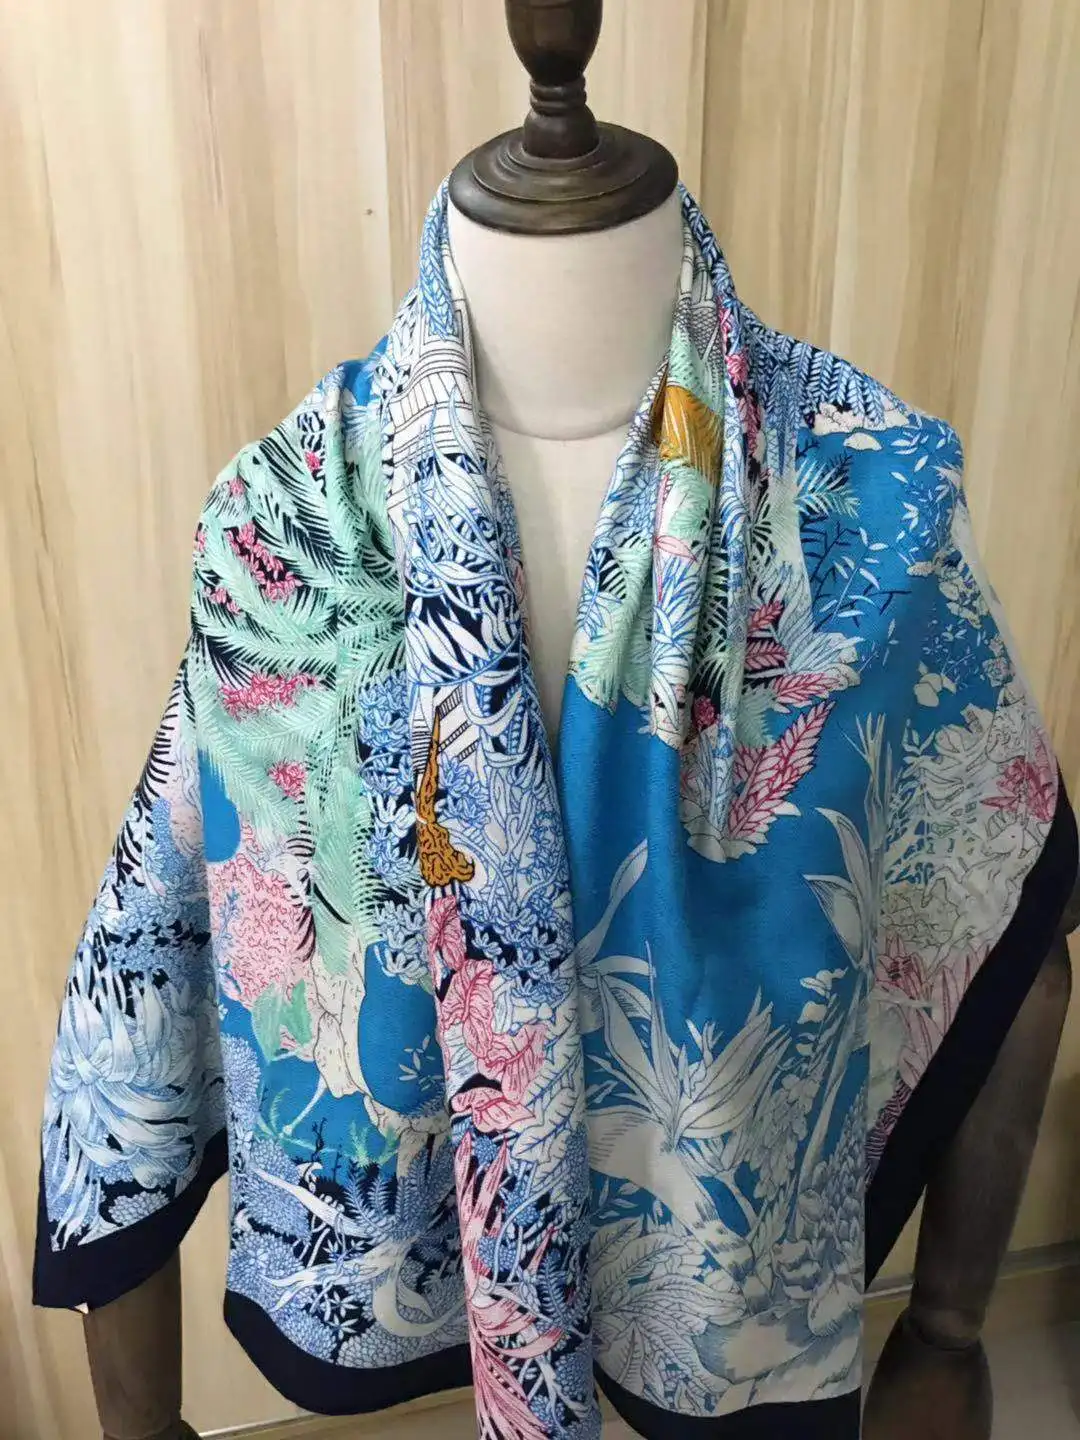 2021 new arrival autumn spring classic tree 140*140 cm colorful scarf 65% cashmere 35% silk scarf wrap for women lady girl